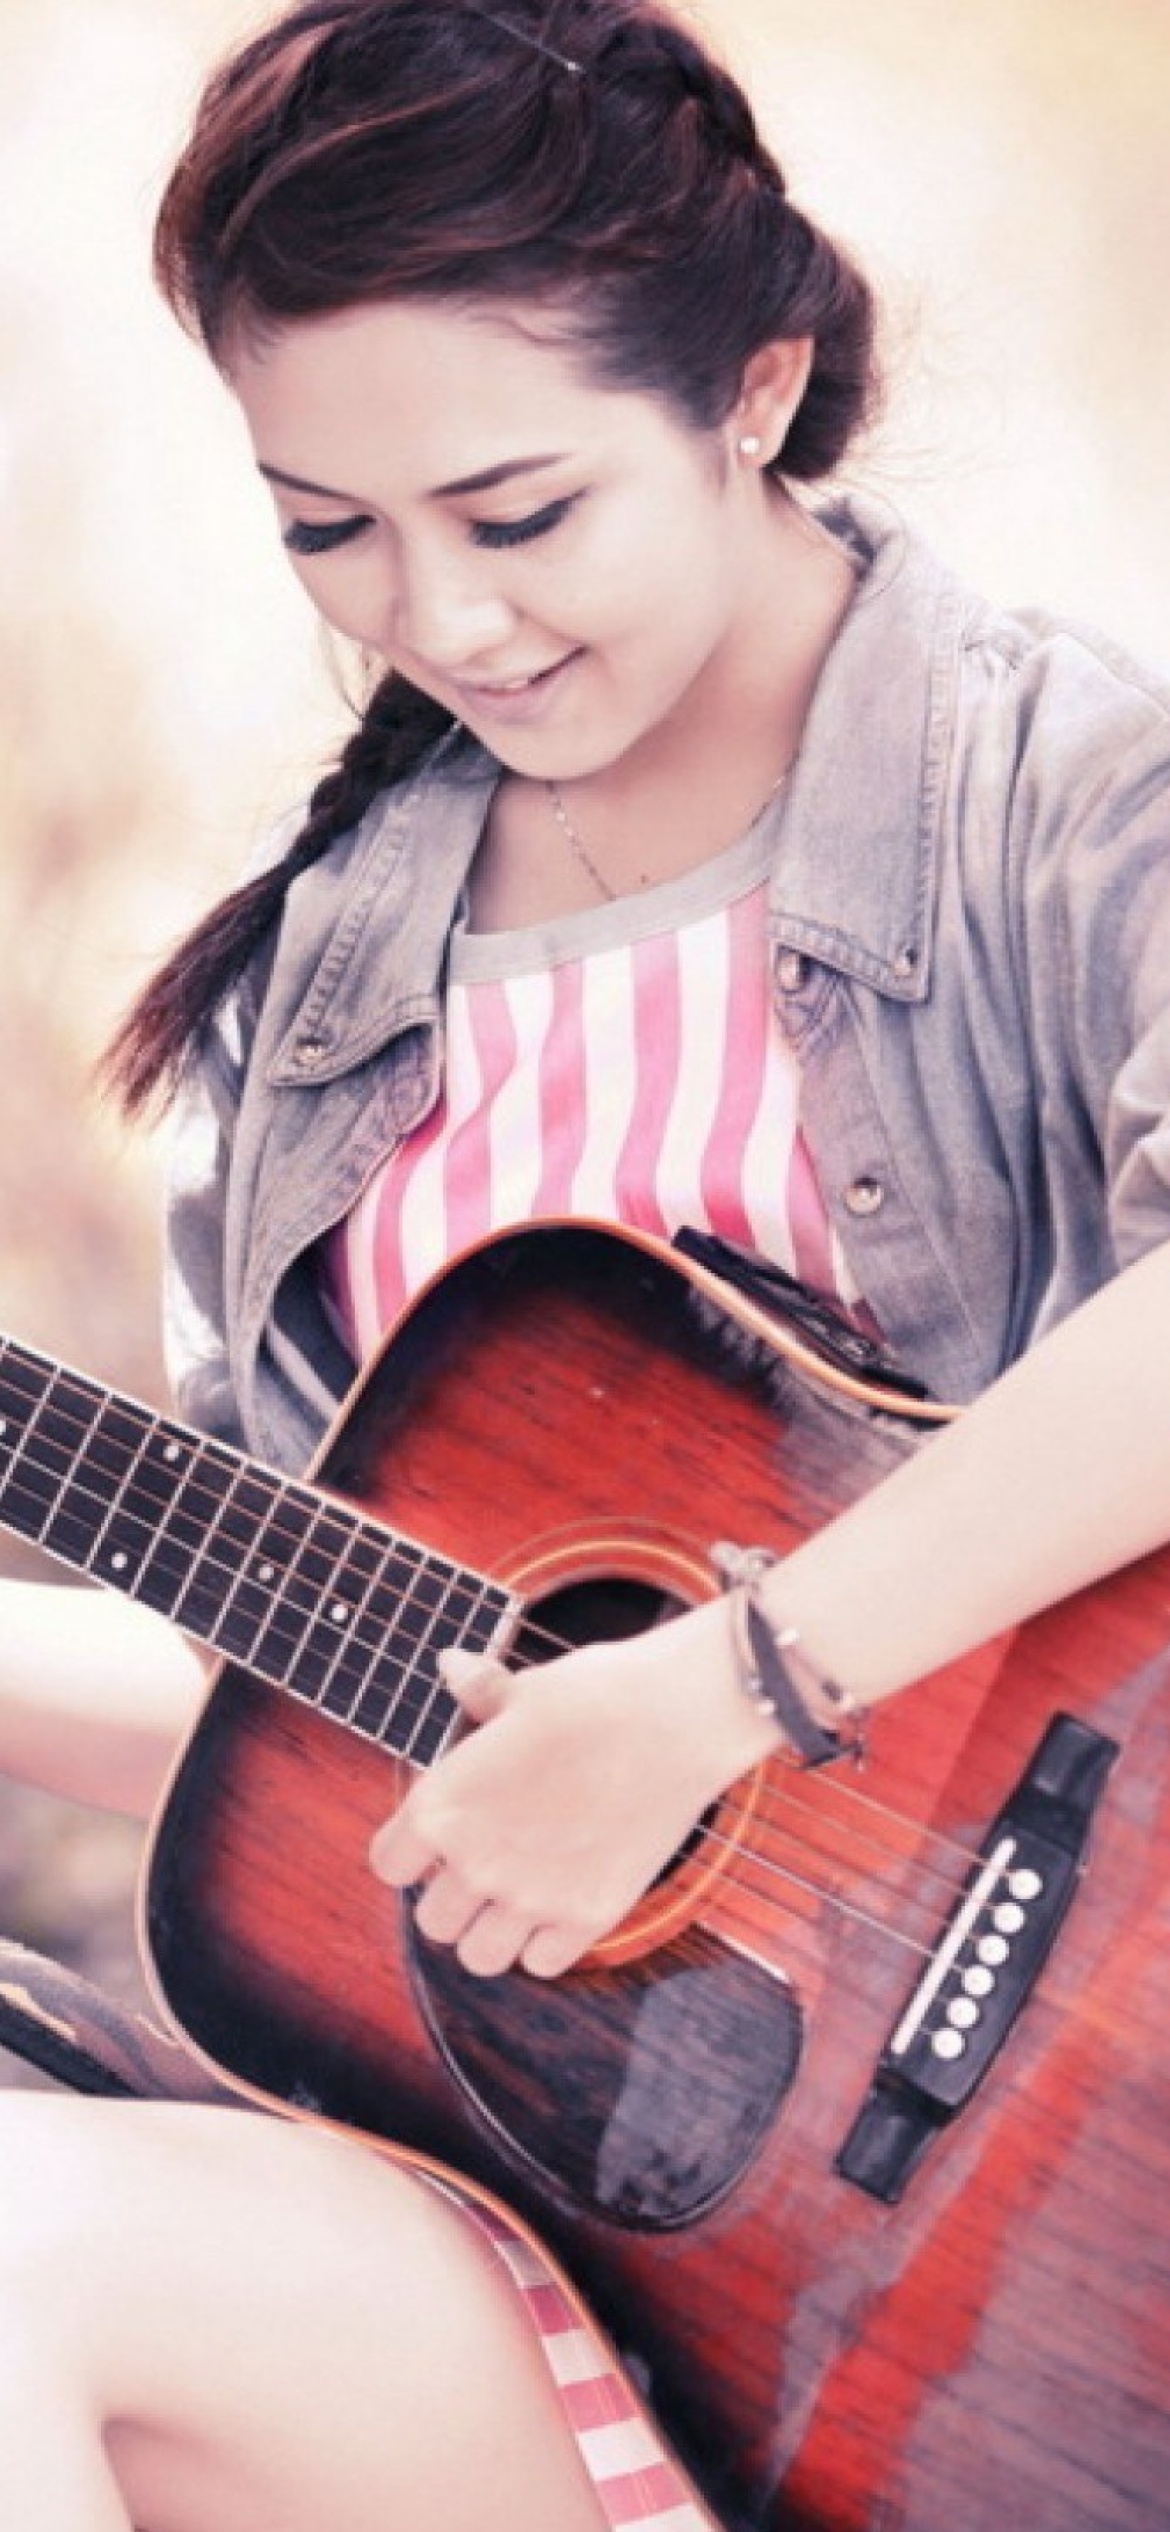 Chinese girl with guitar wallpaper 1170x2532